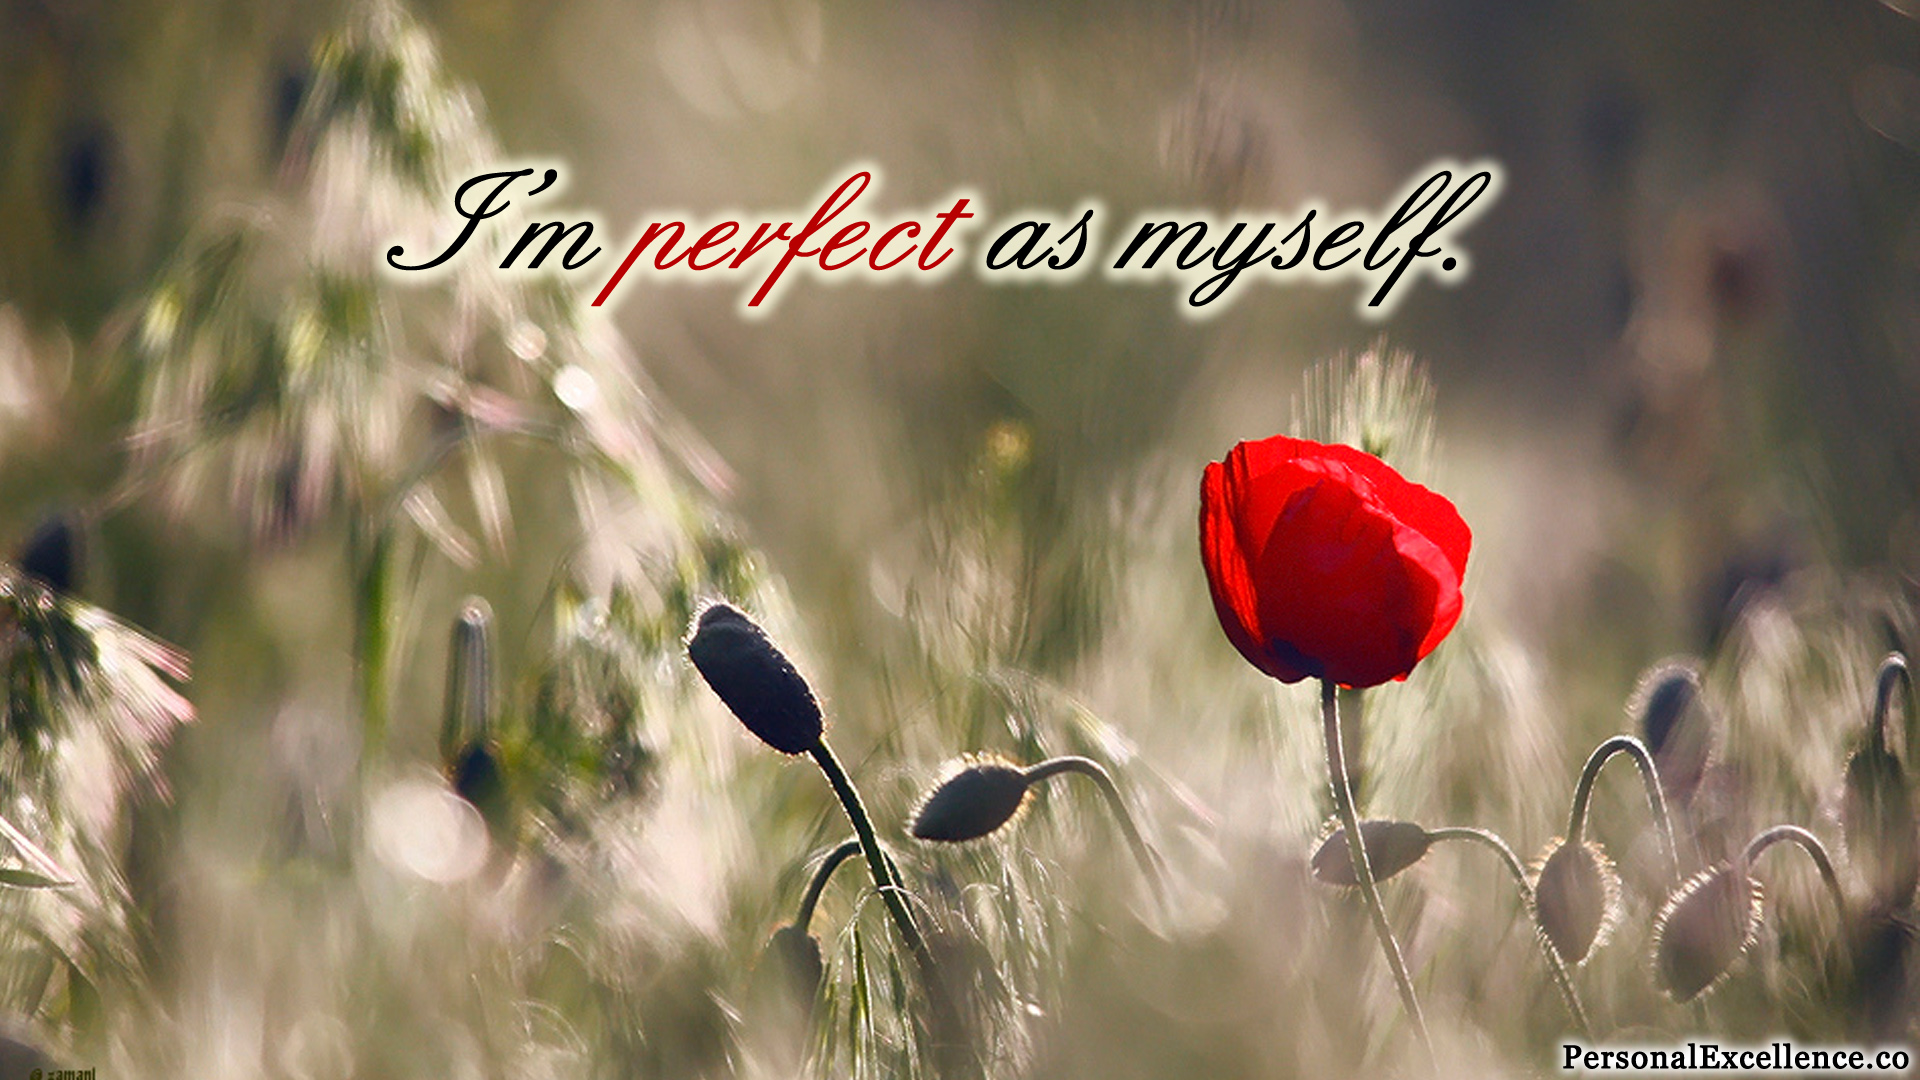 15 More Beautiful Wallpapers With Positive Affirmations - Personal